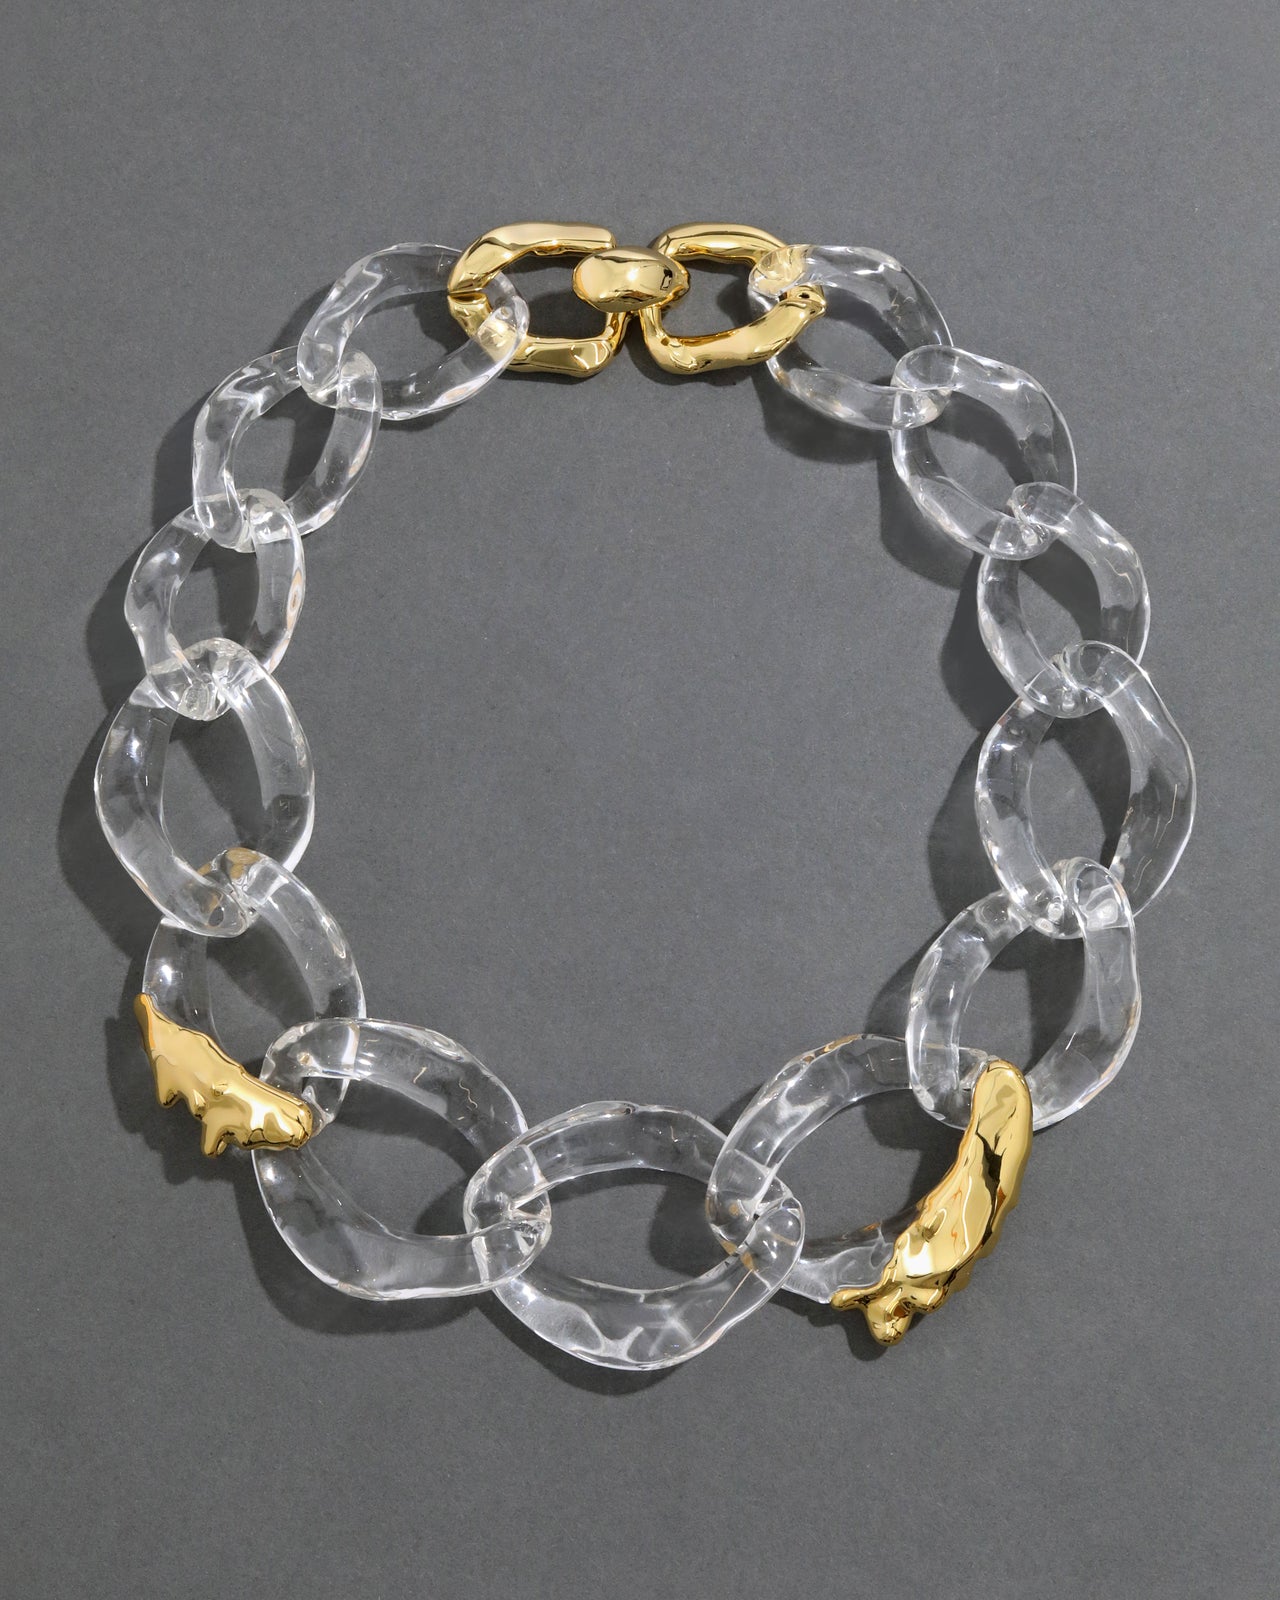 Alexis Bittar Lucite Molten x Large Link Necklace in Clear | Statement Jewelry from Alexis Bittar